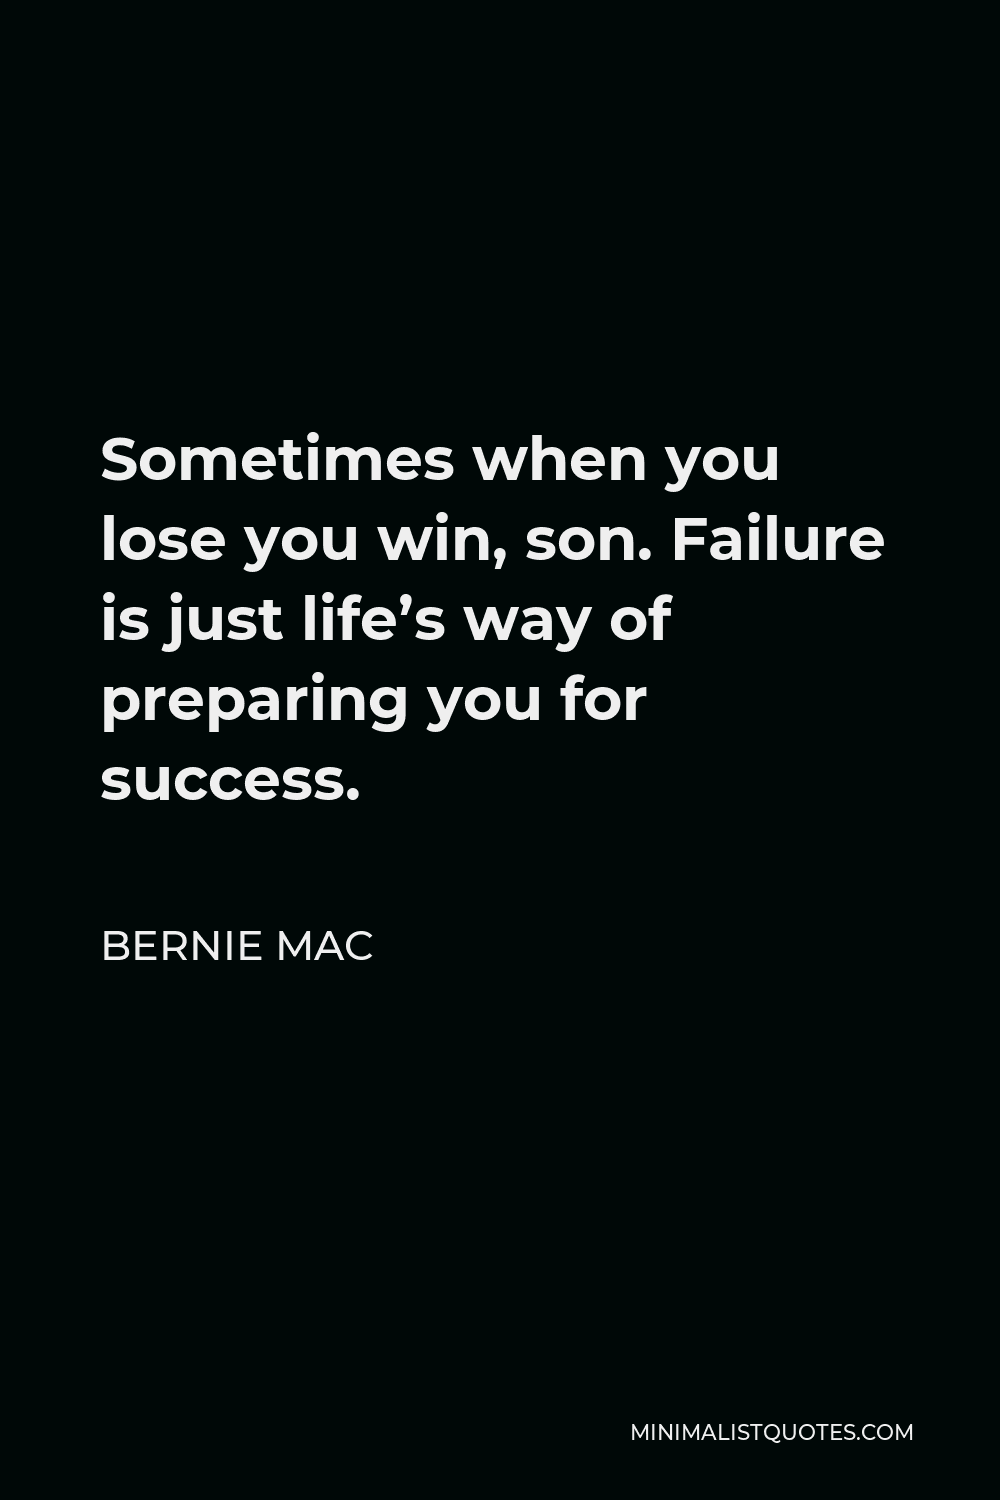 Bernie Mac Quote - Sometimes when you lose you win, son. Failure is just life’s way of preparing you for success.